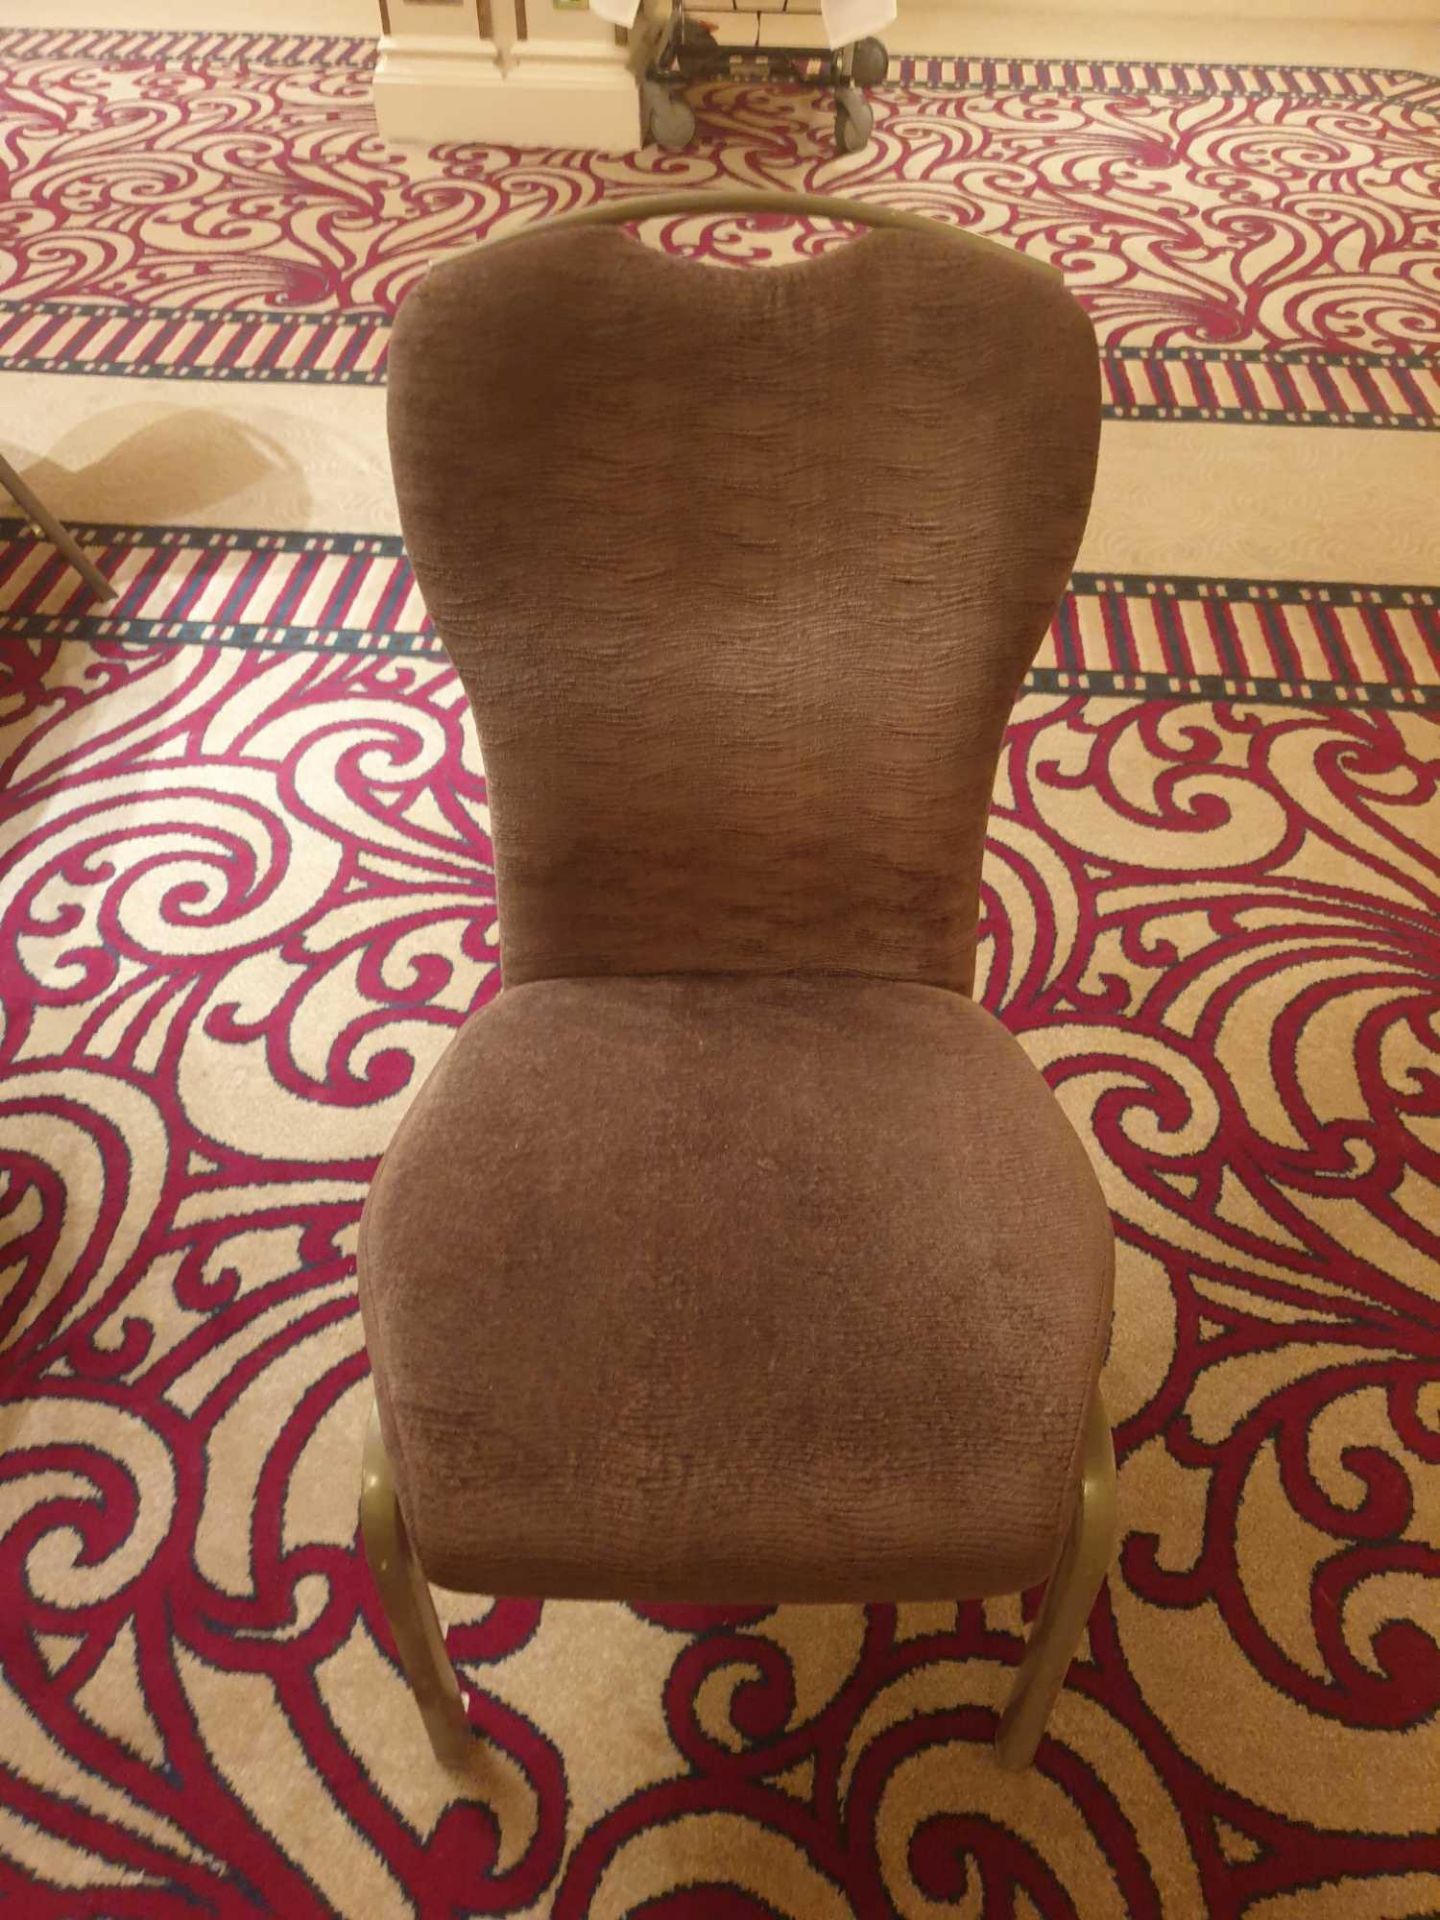 10x Burgess Taupe Upholstered Vario-Allday 21/7 Ergonomic Banqueting Chairs - Image 2 of 2